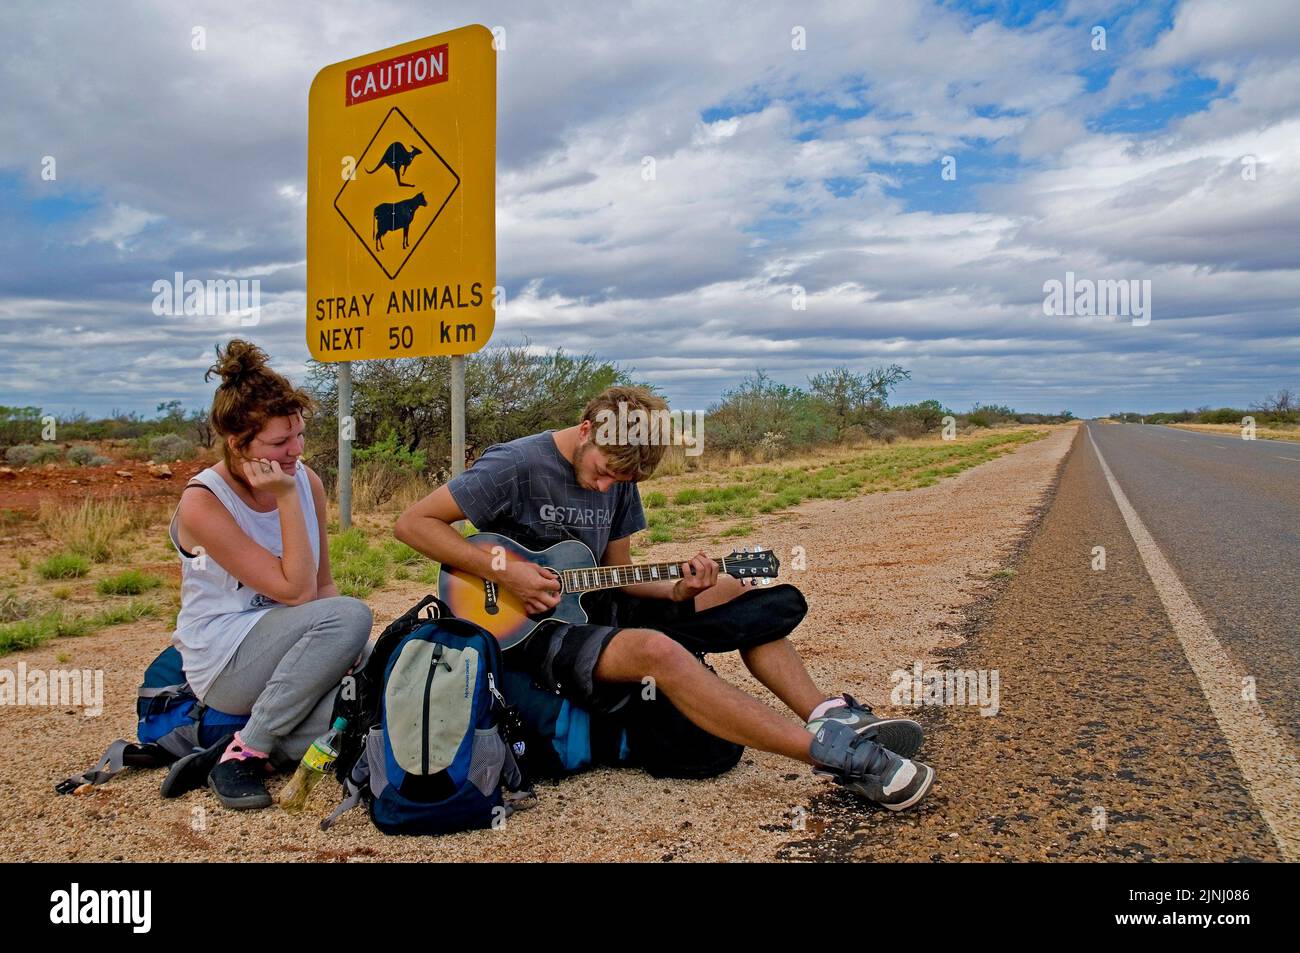 A couple of young British backpackers waiting for a lift on the highway near Monkey Mia in Western Australia Stock Photo